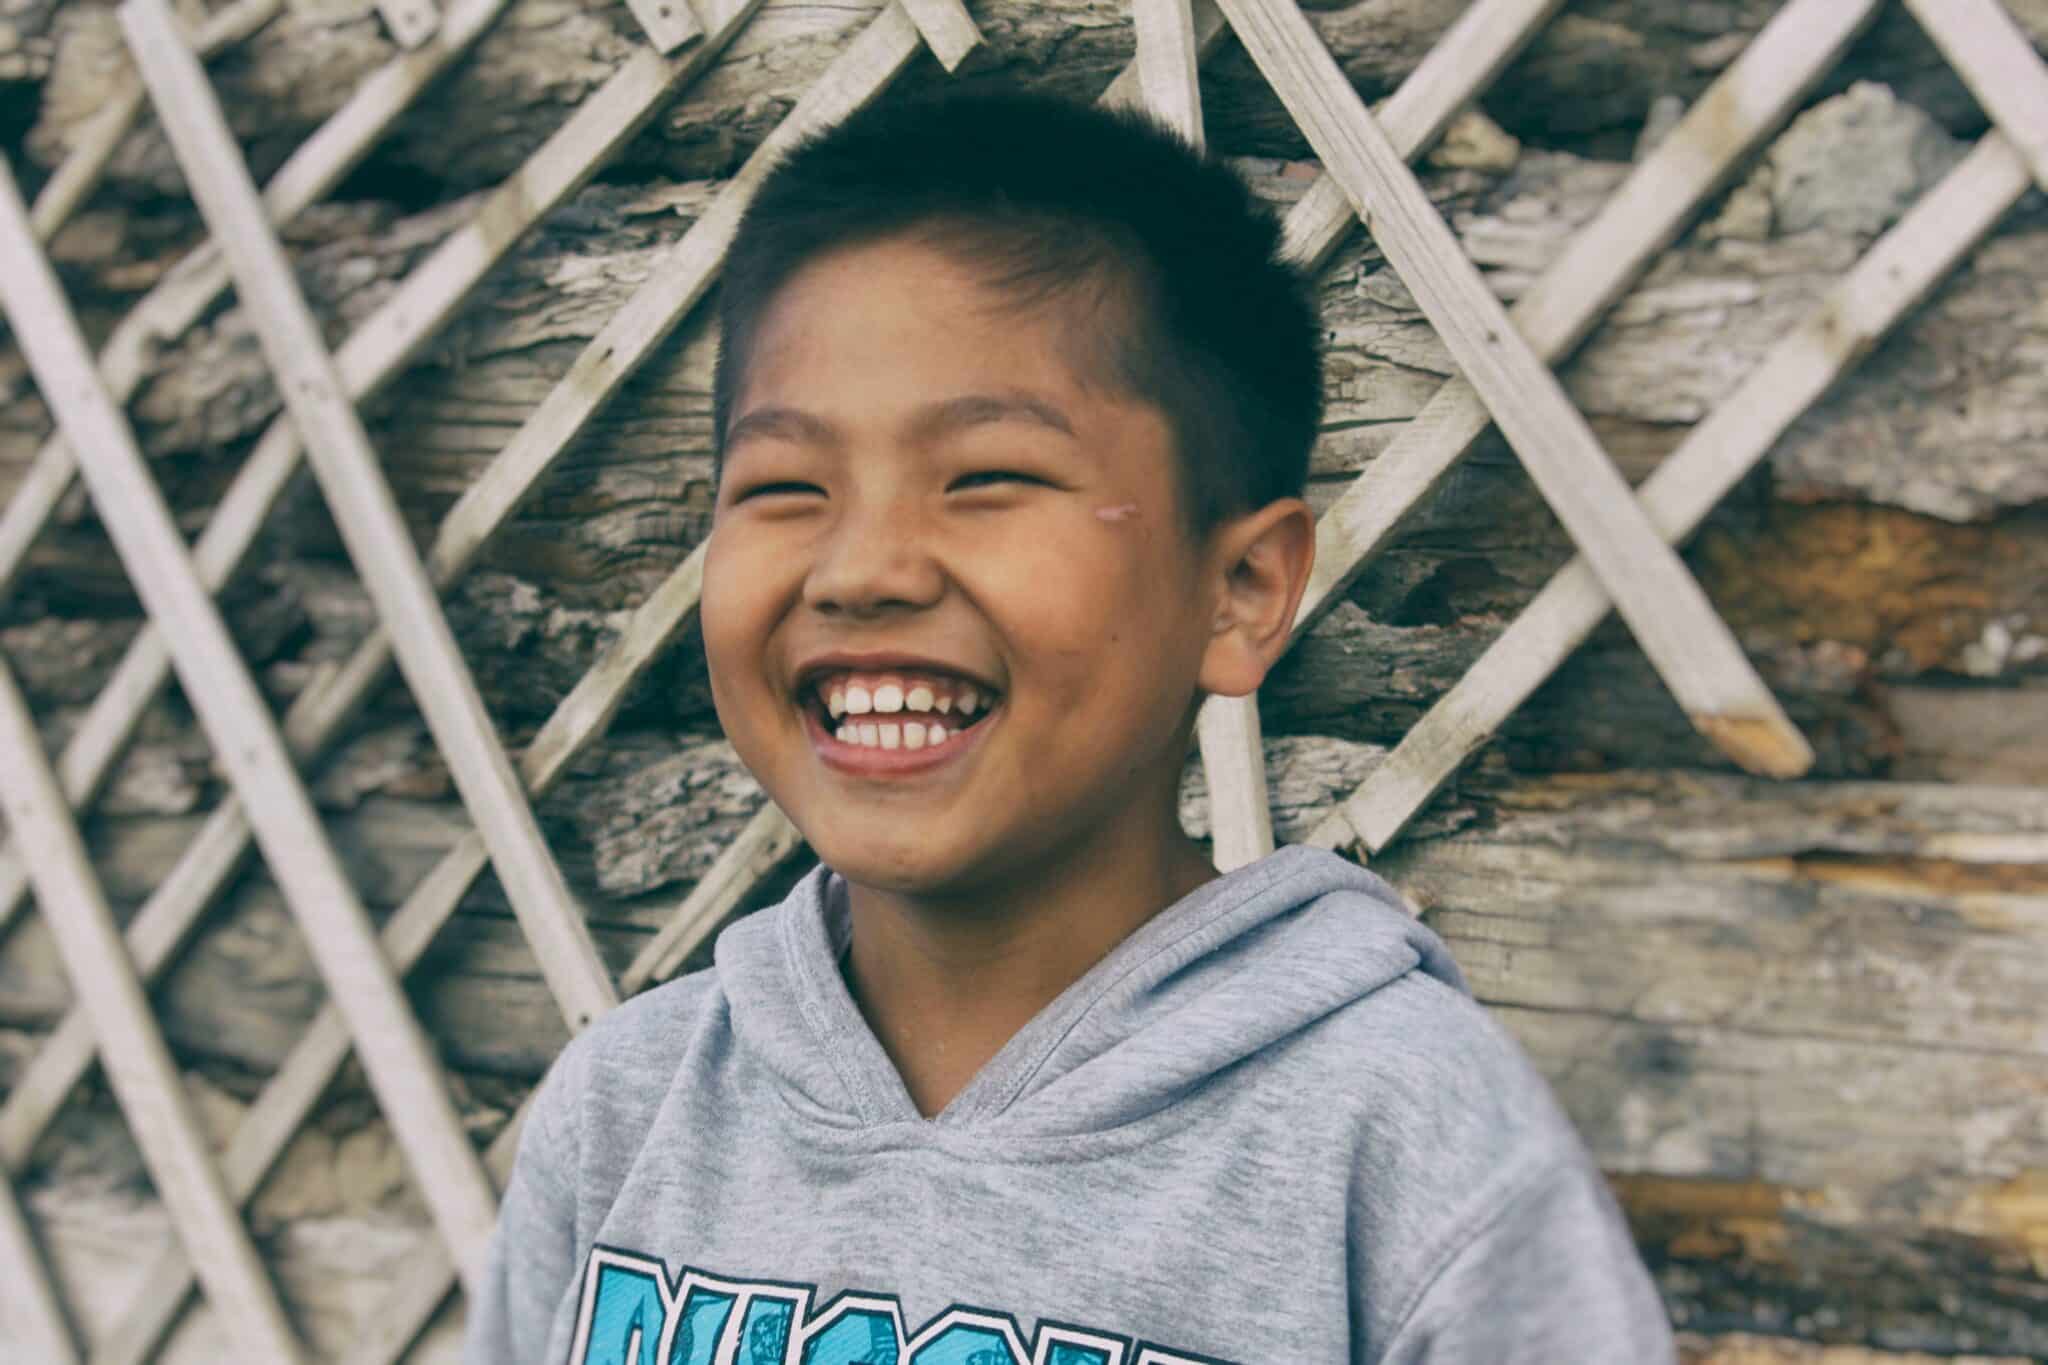 Young kid laughing | Photo by Sane Sodbayar on Unsplash